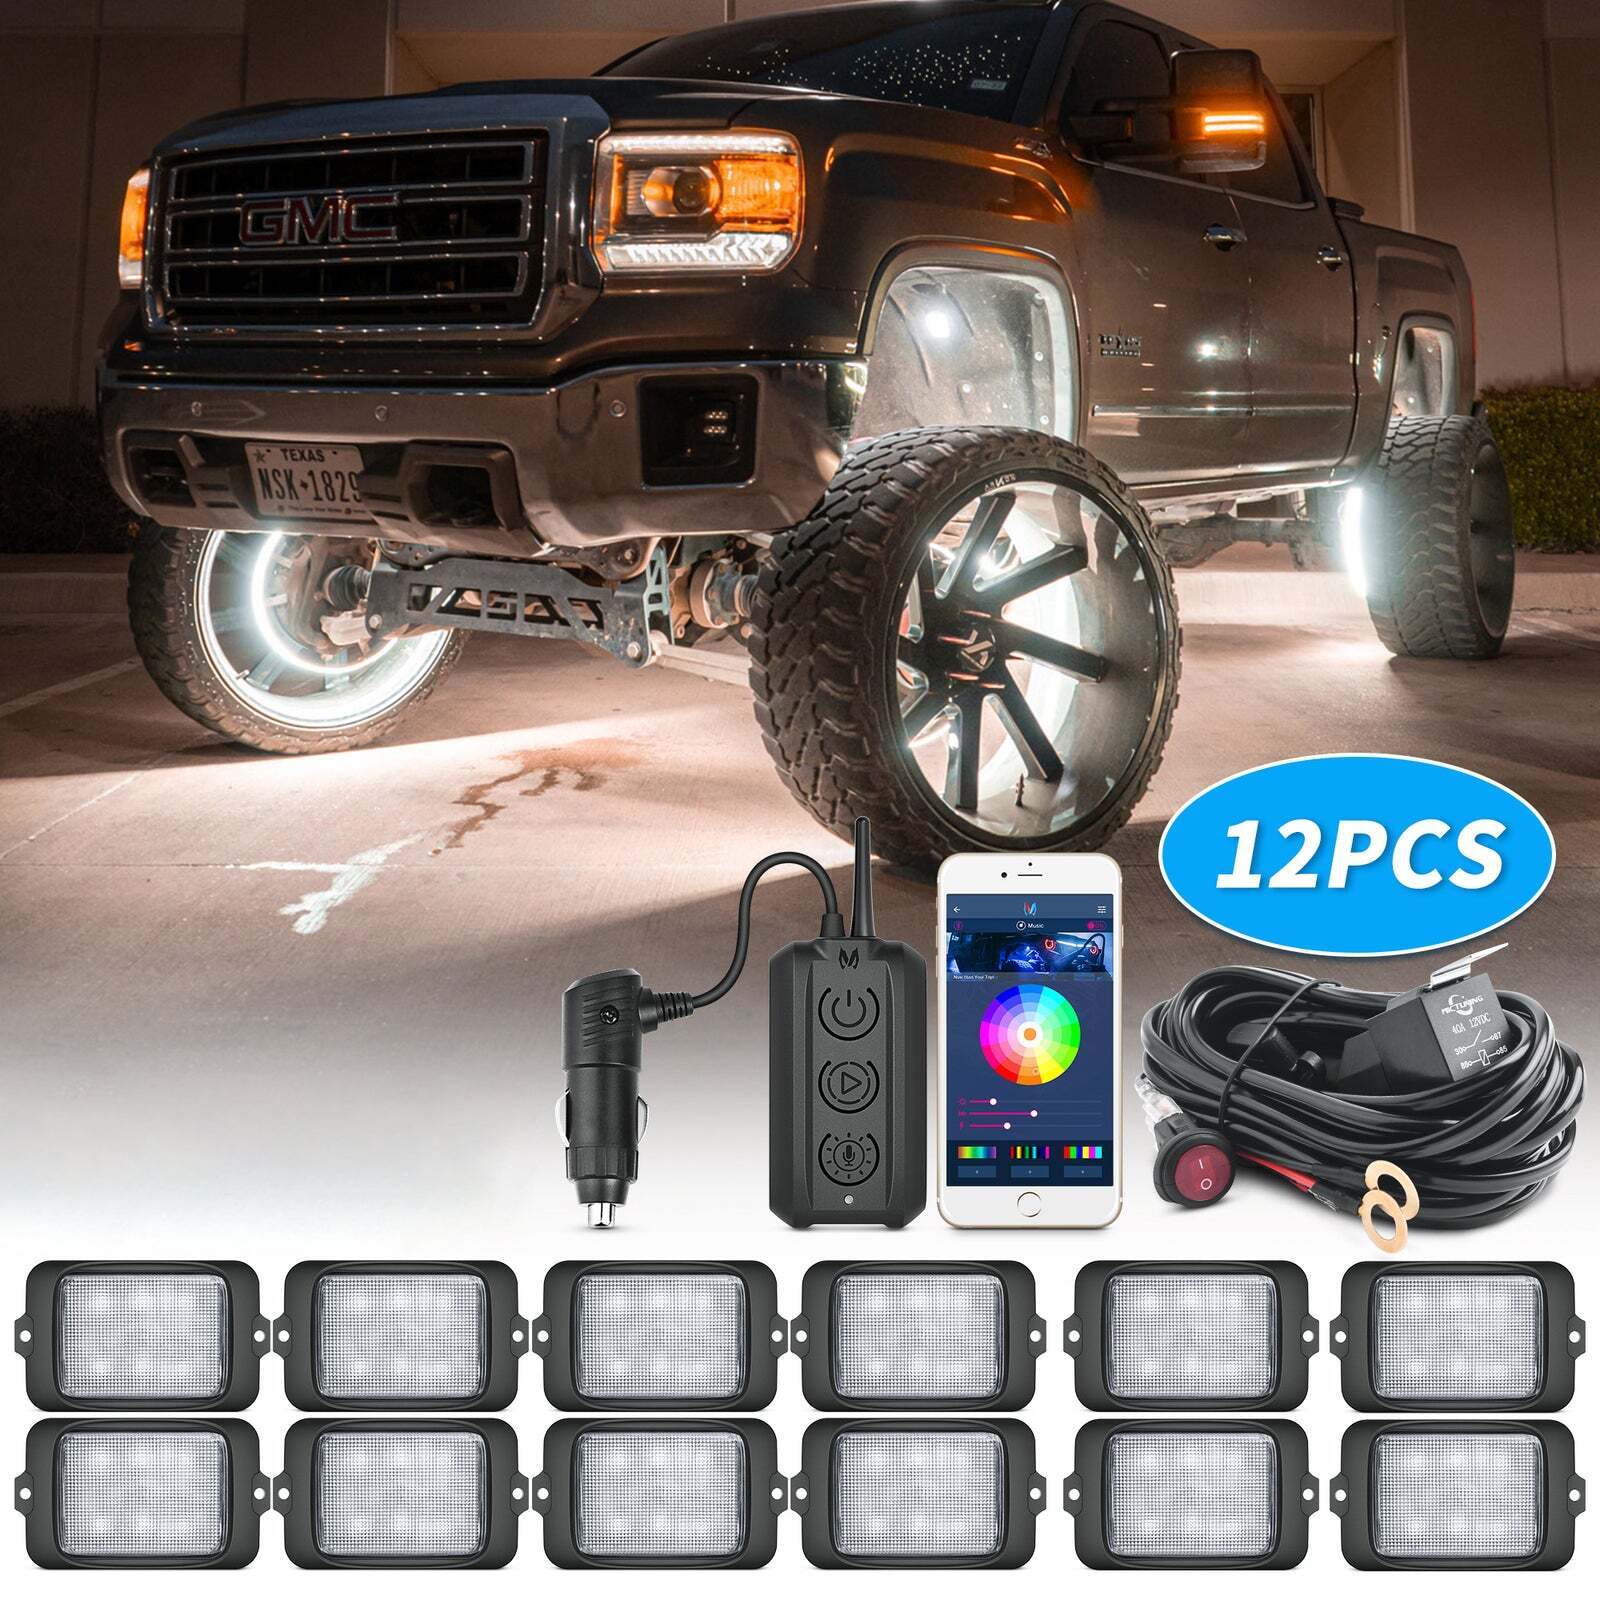 MICTUNING C3 12 Pod RGBW LED Rock Lights OffRoad Underglow Multicolor Neon Light